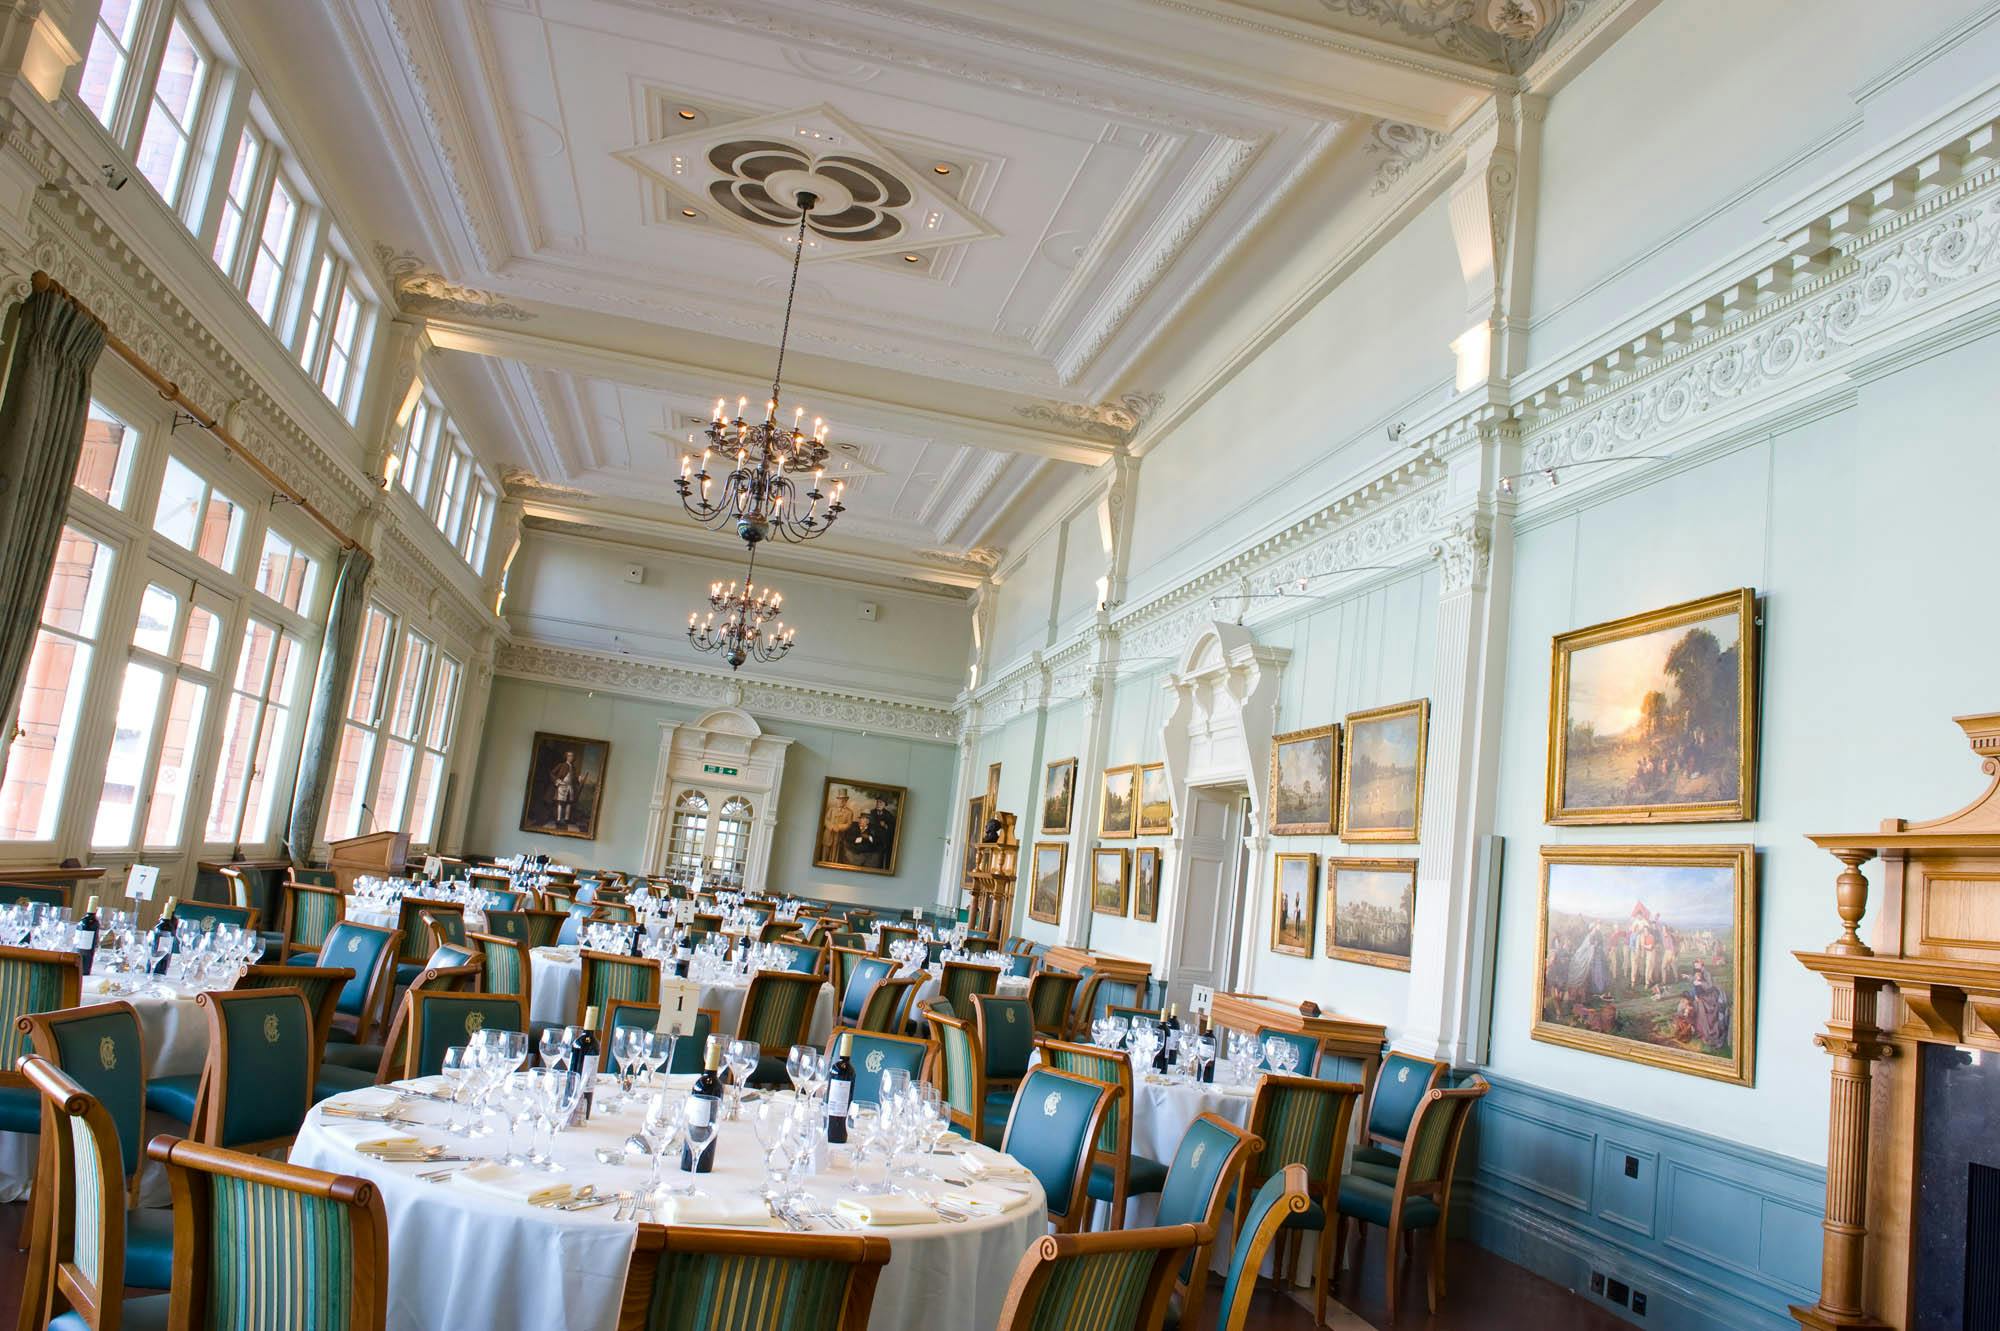 Lord's Cricket Ground - Long Room image 1